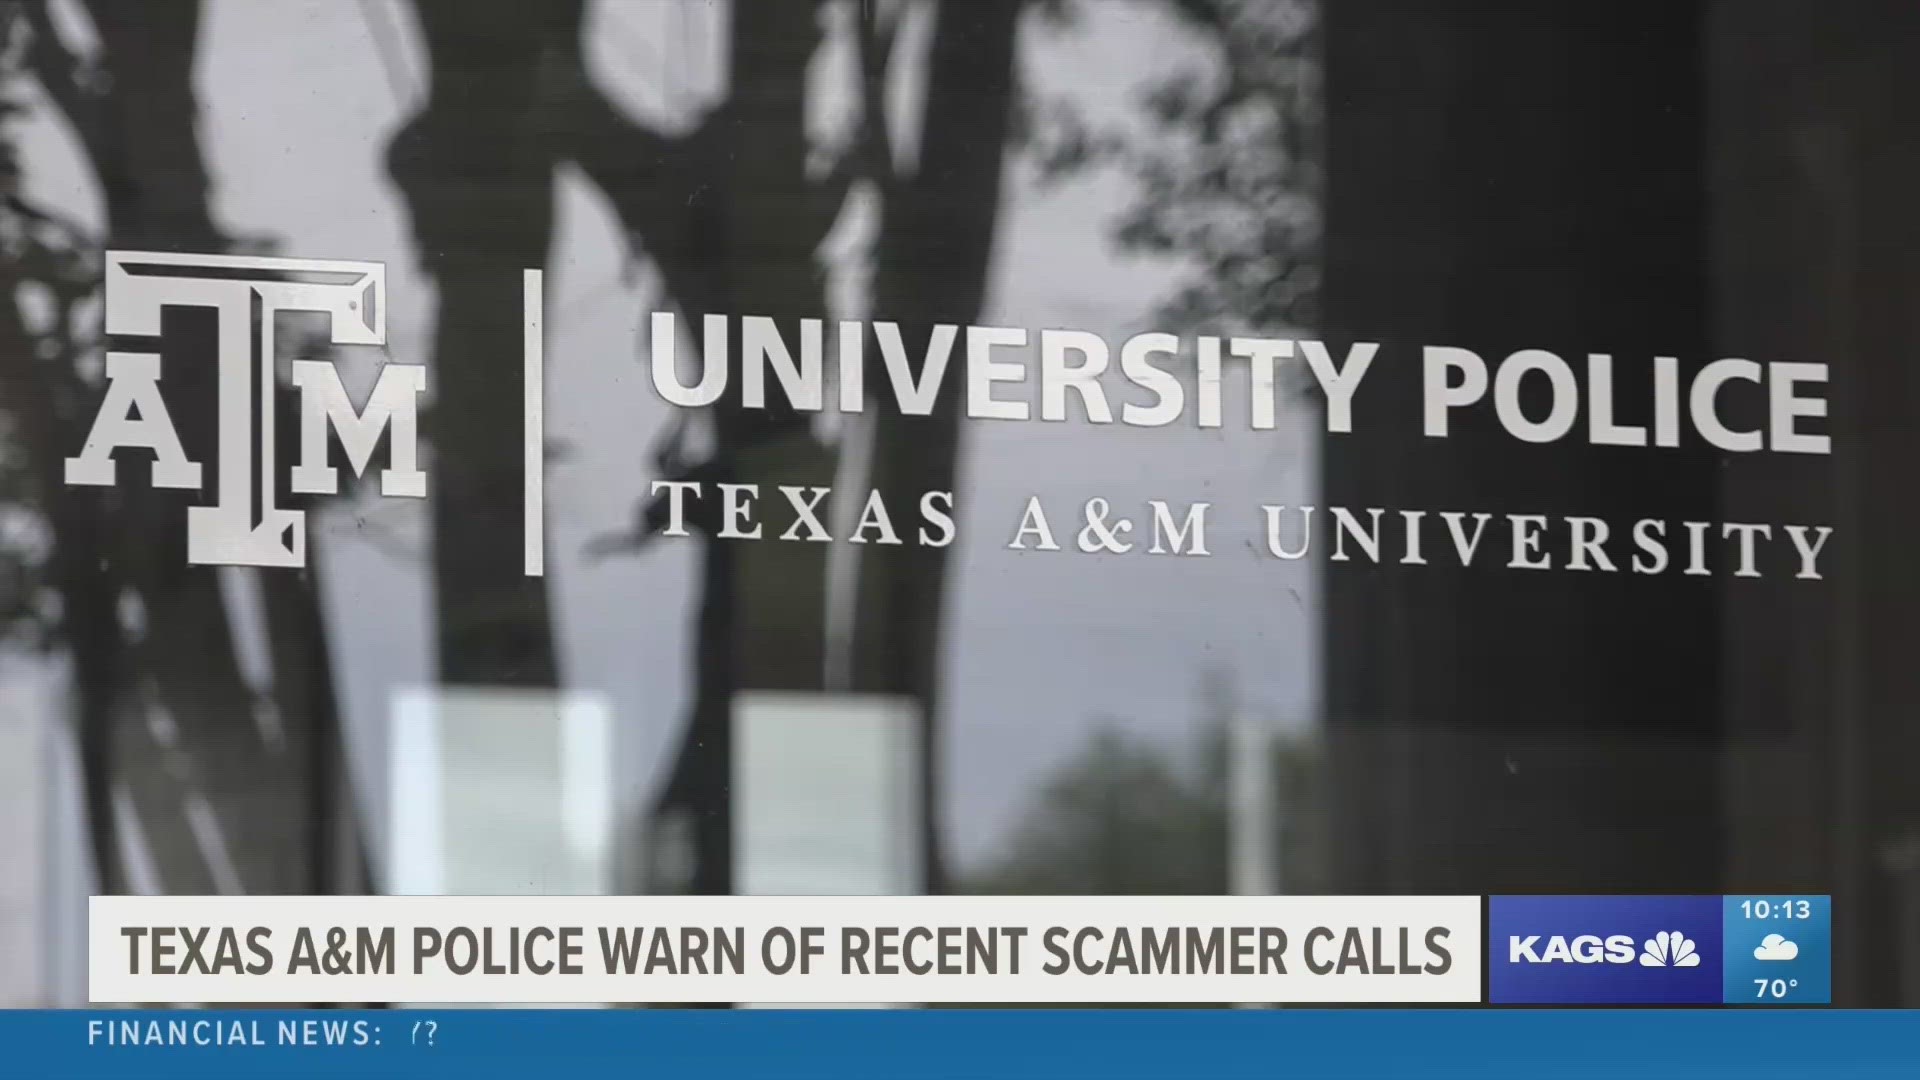 Police say that the scammers are calling Aggie parents and demanding payments by Venmo, claiming that their student will jailed if their demands aren't met.